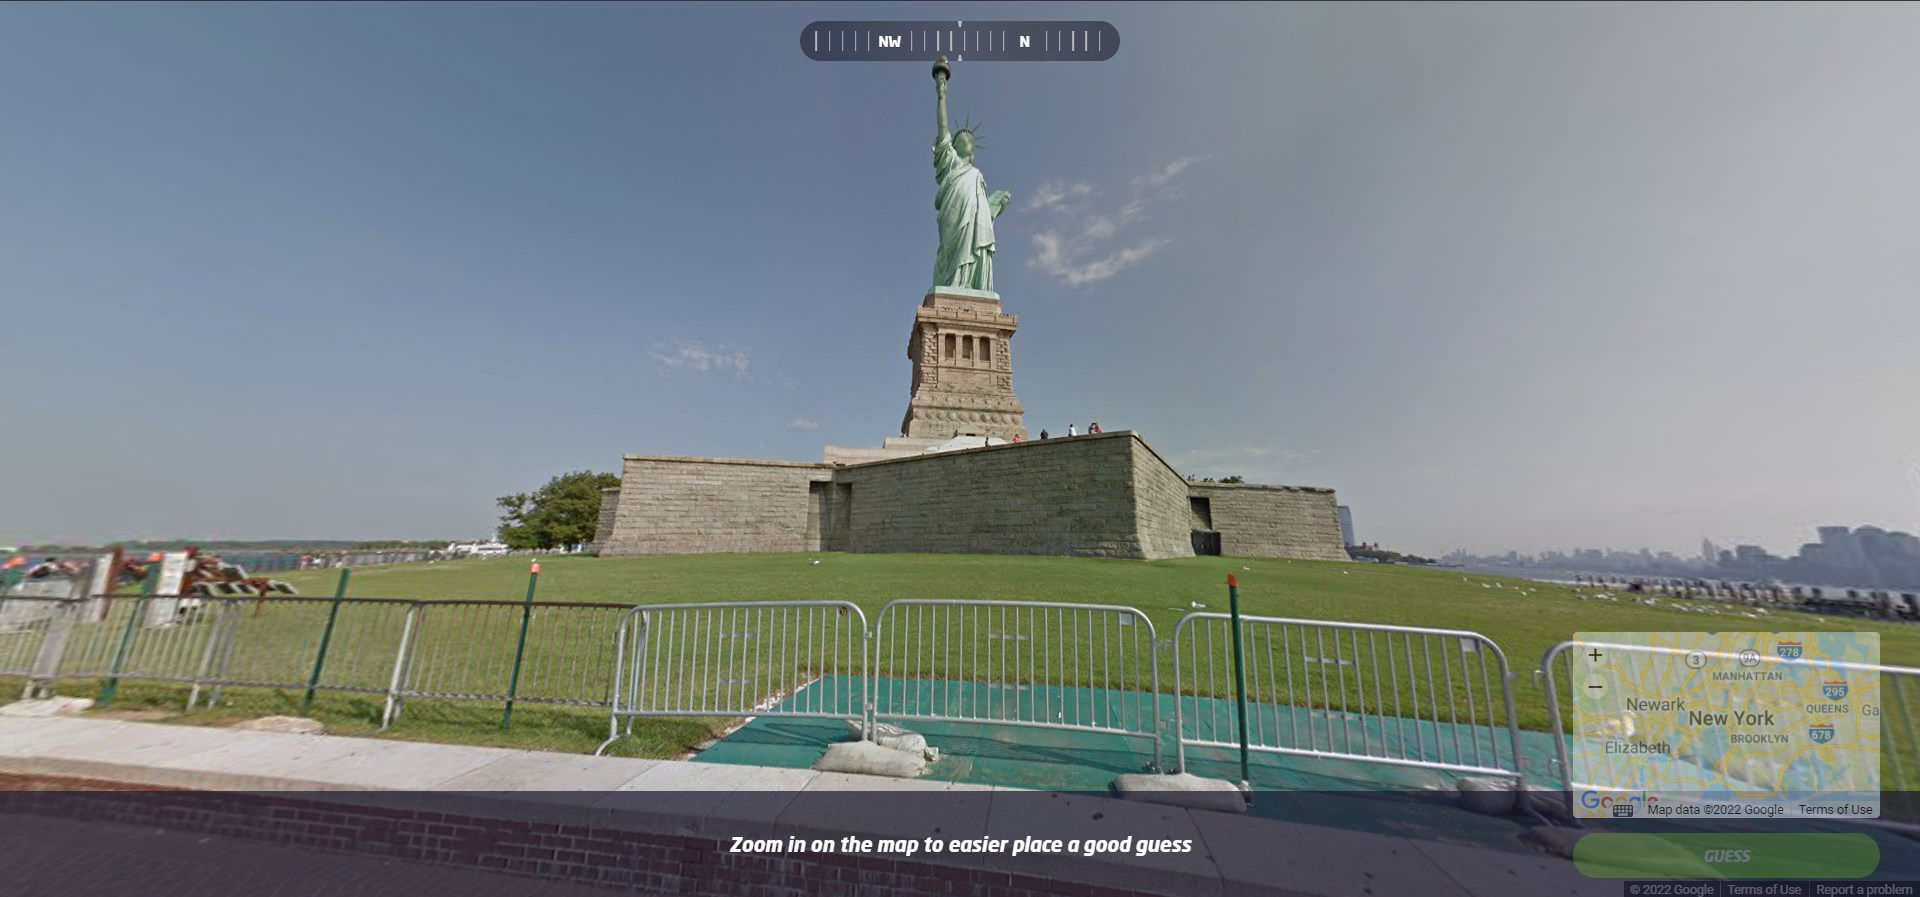 geoguessr-guess-empire-state